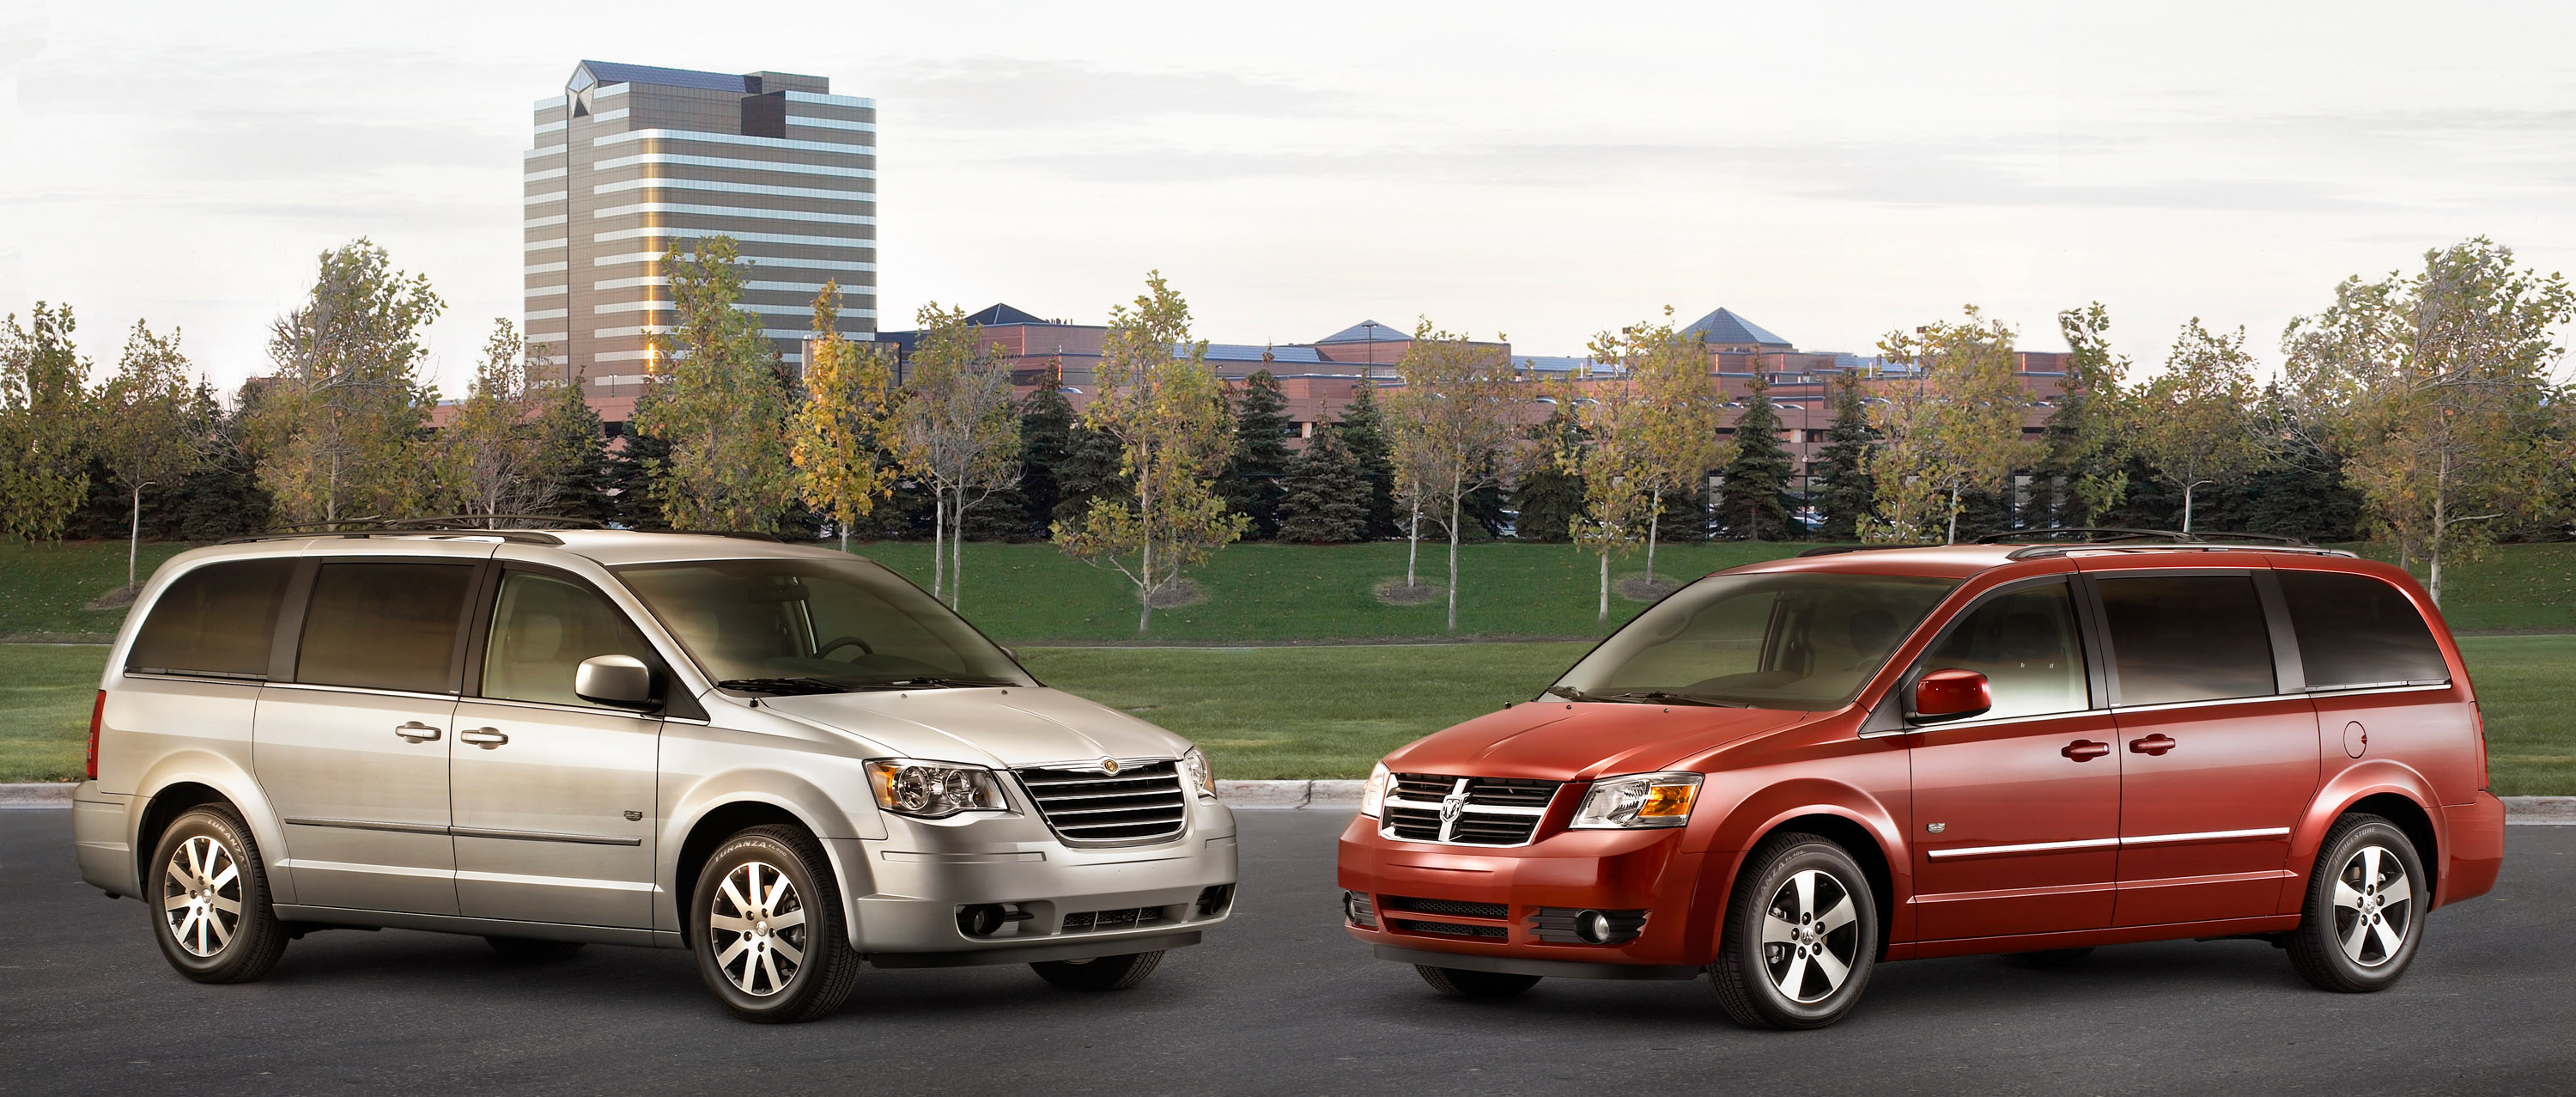 Chrysler Town & Country 25th Anniversary Edition